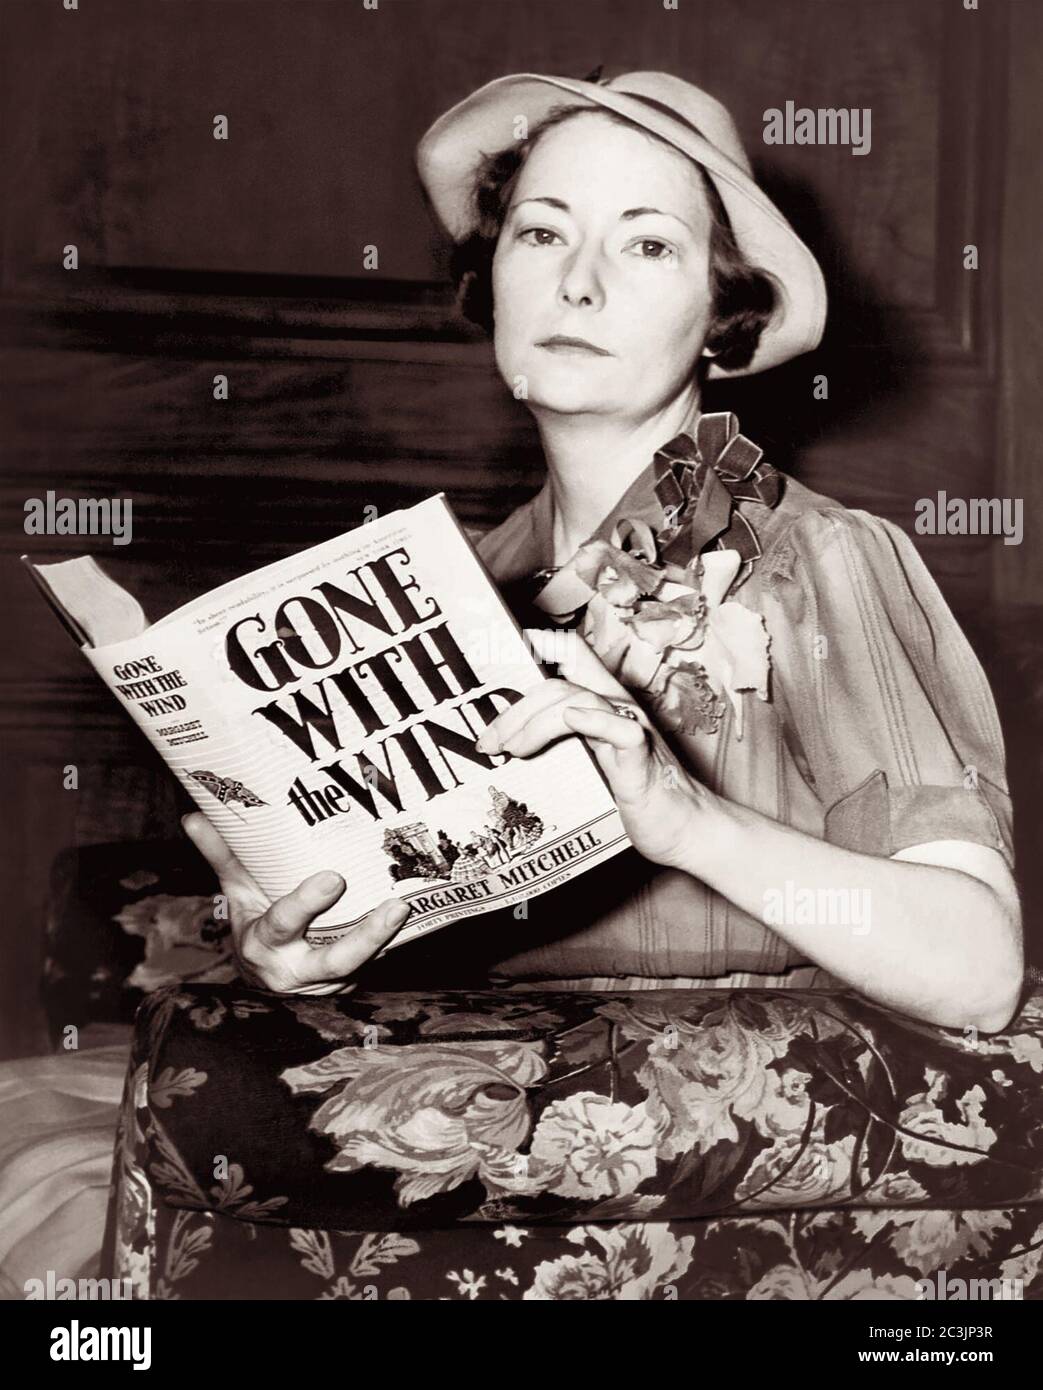 Margaret Munnerlyn Mitchell (1900-1949) was an American novelist and journalist from Atlanta, Georgia, who wrote the American Civil War-era novel Gone with the Wind, for which she won the National Book Award for Most Distinguished Novel of 1936 and the Pulitzer Prize for Fiction in 1937. Stock Photo